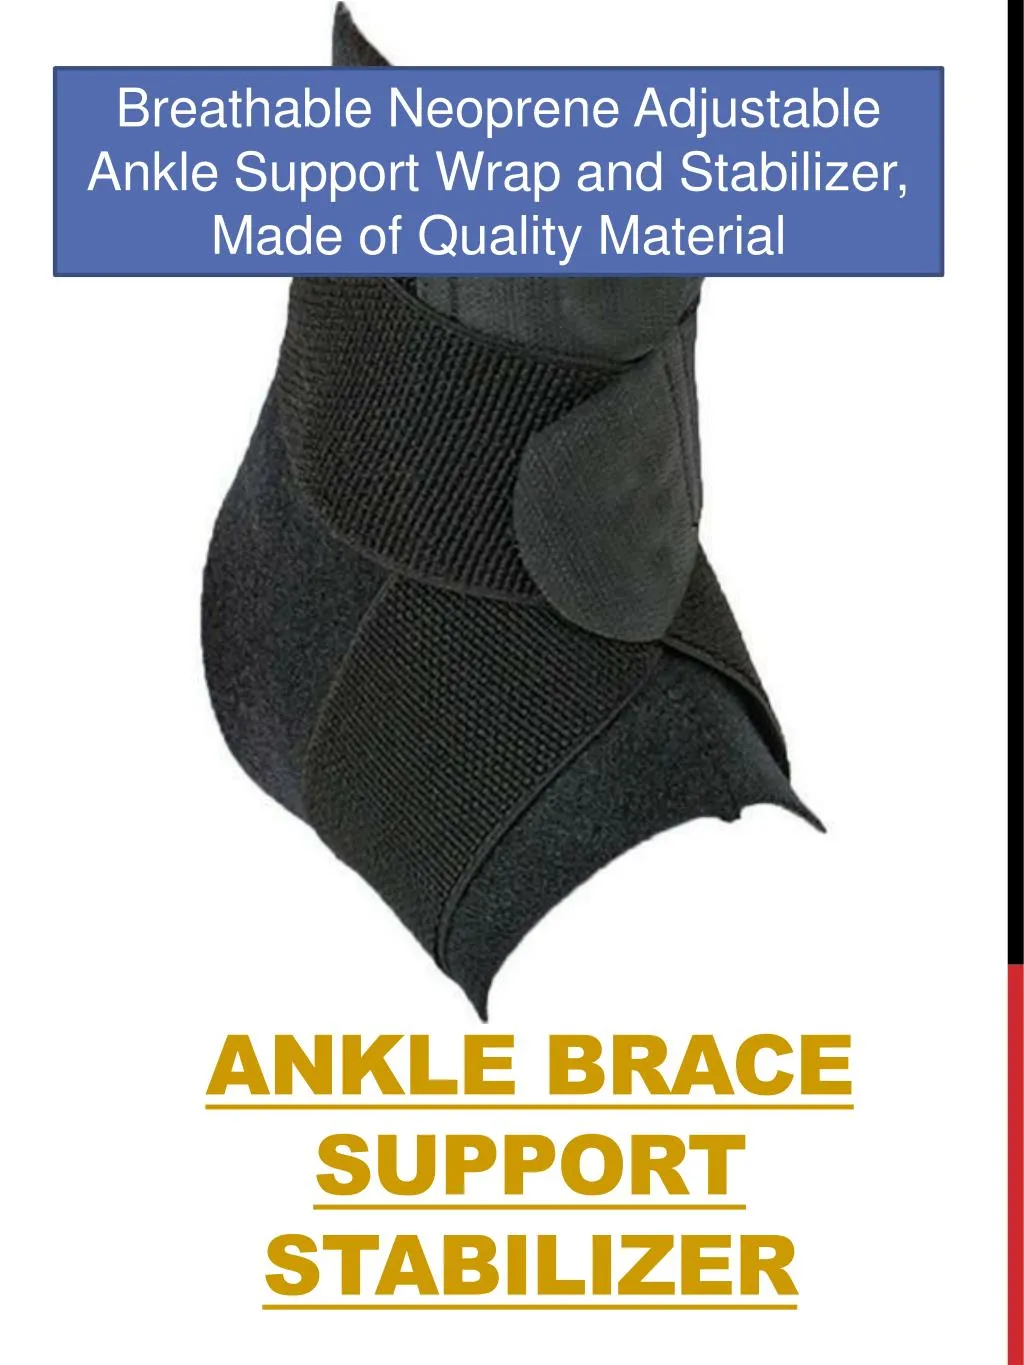 breathable neoprene adjustable ankle support wrap